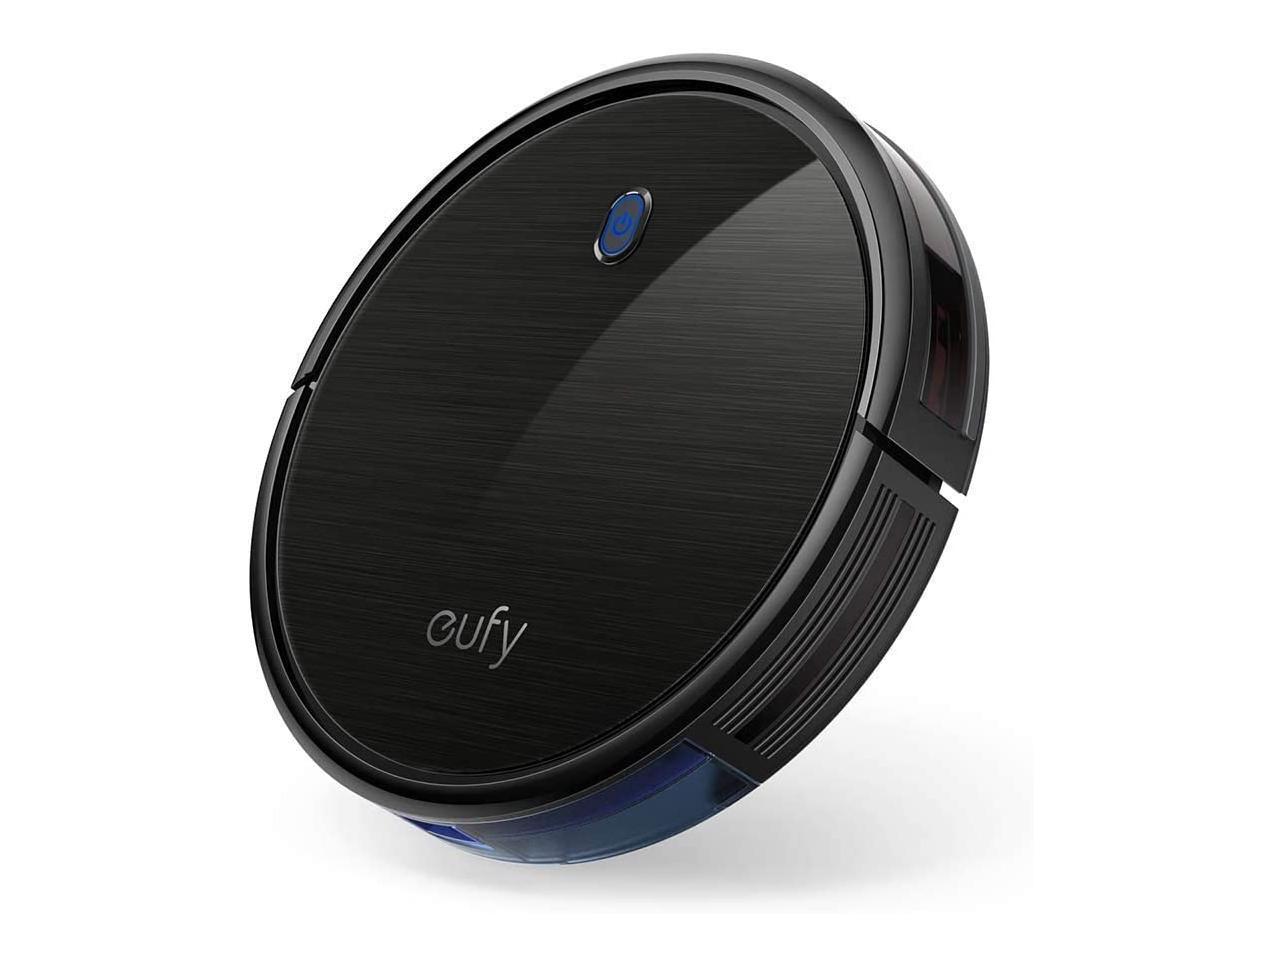 Eufy Boost IQ RoboVac 11S (Slim), 1300Pa Strong Suction, Super Quiet, Self-Charging Robotic Vacuum Cleaner (refurb) for $105.99 AC